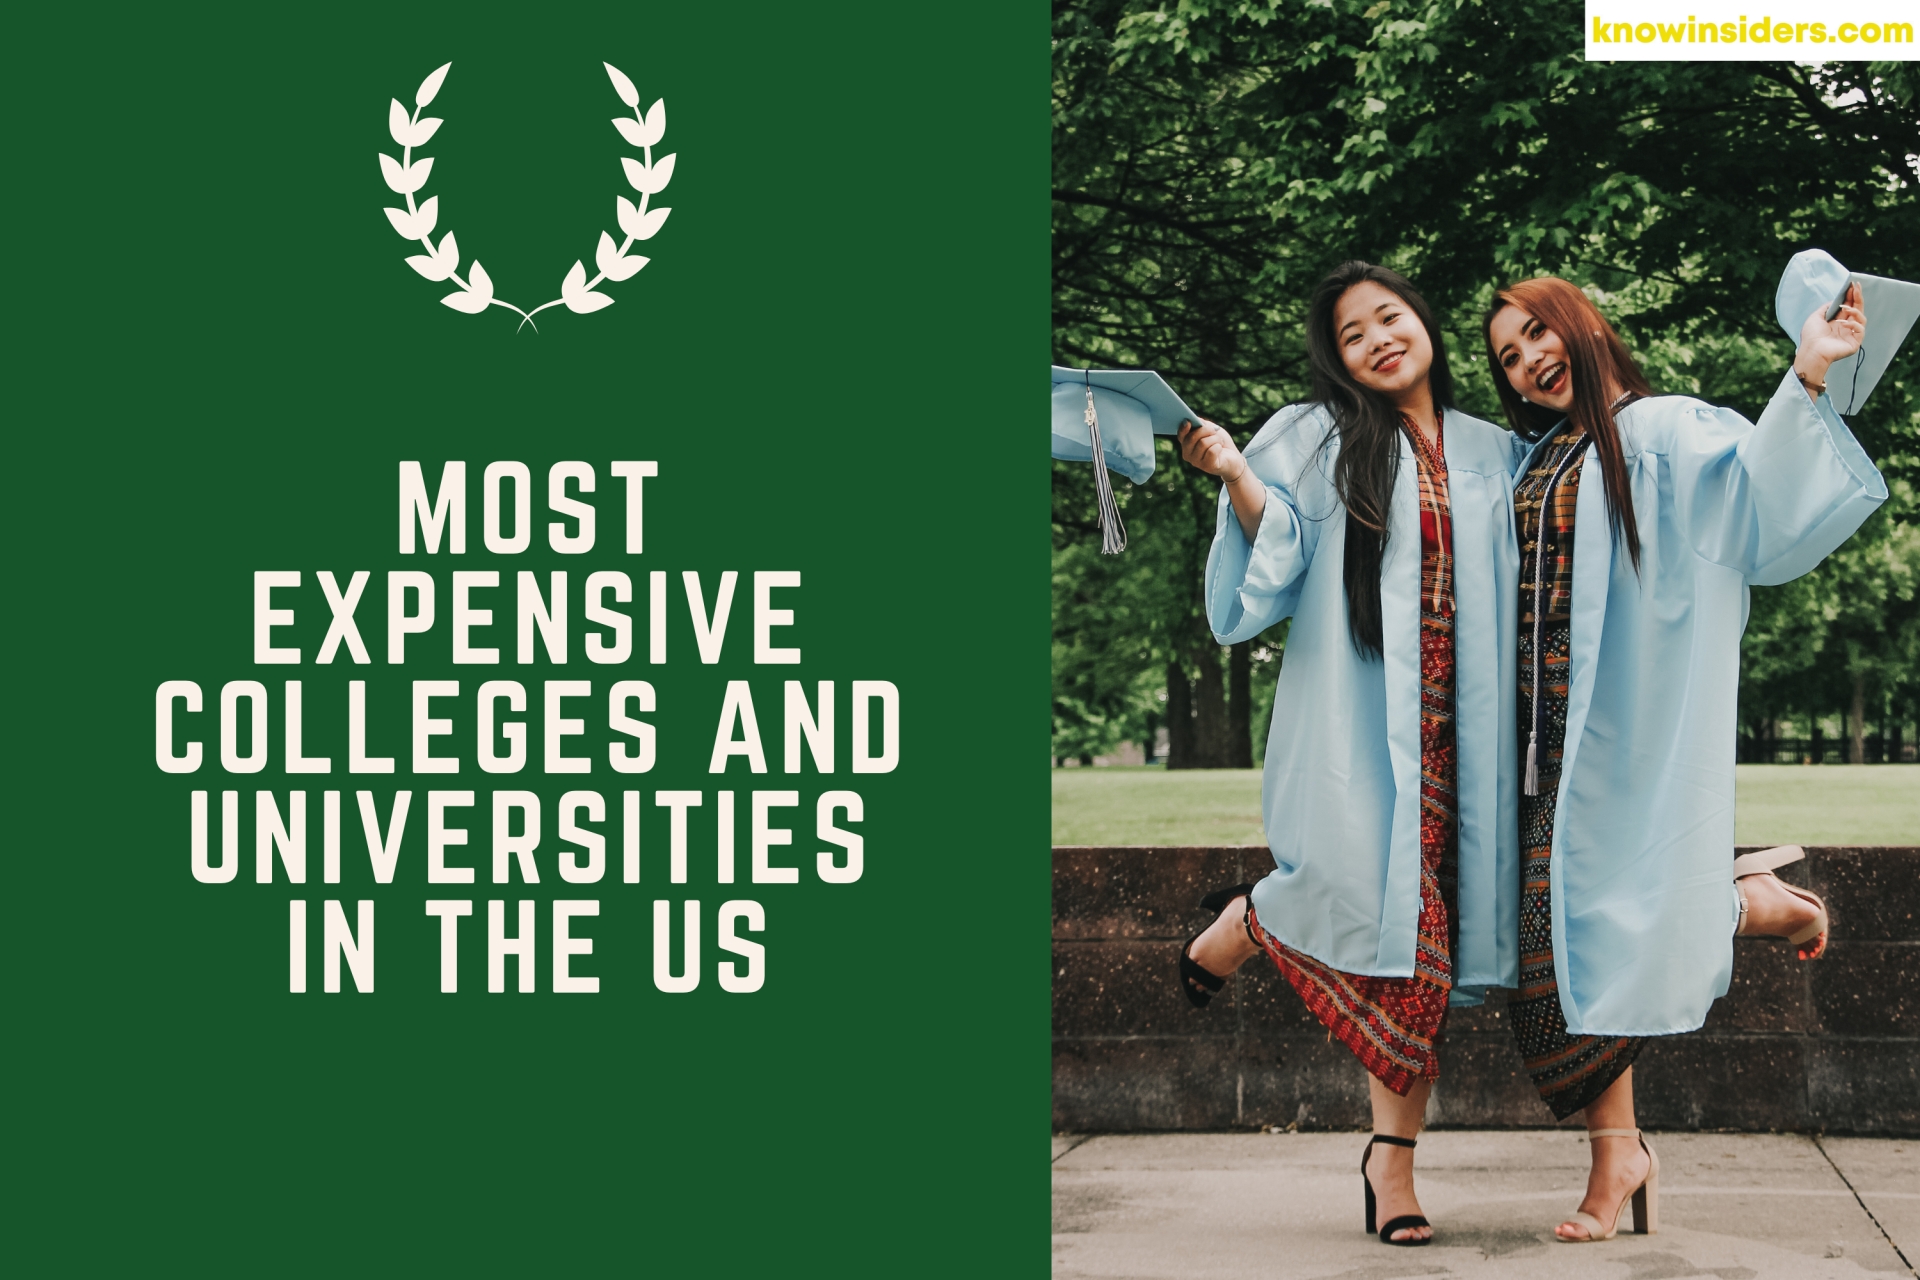 10 Most Expensive Colleges and Universities In The US Today